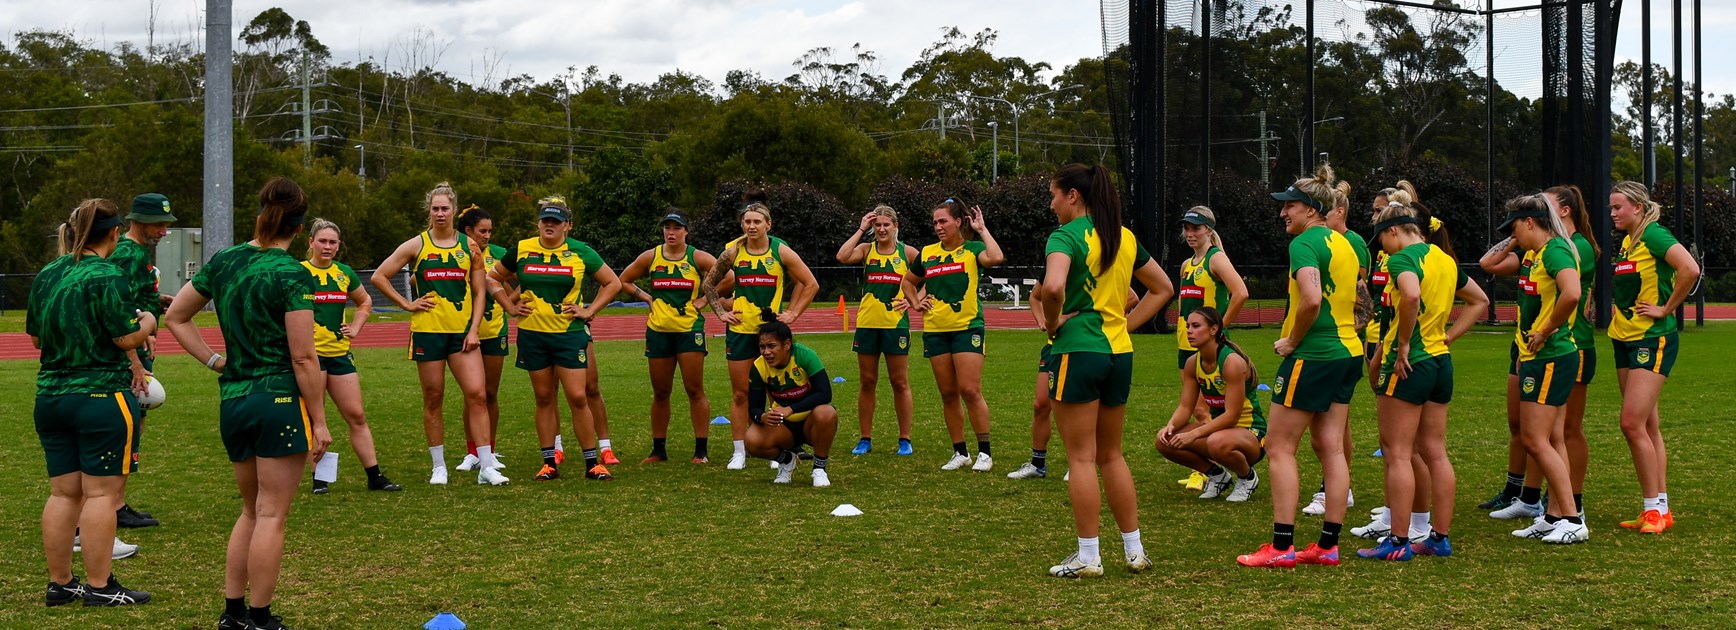 Past meets present as Jillaroos prepare to defend their title